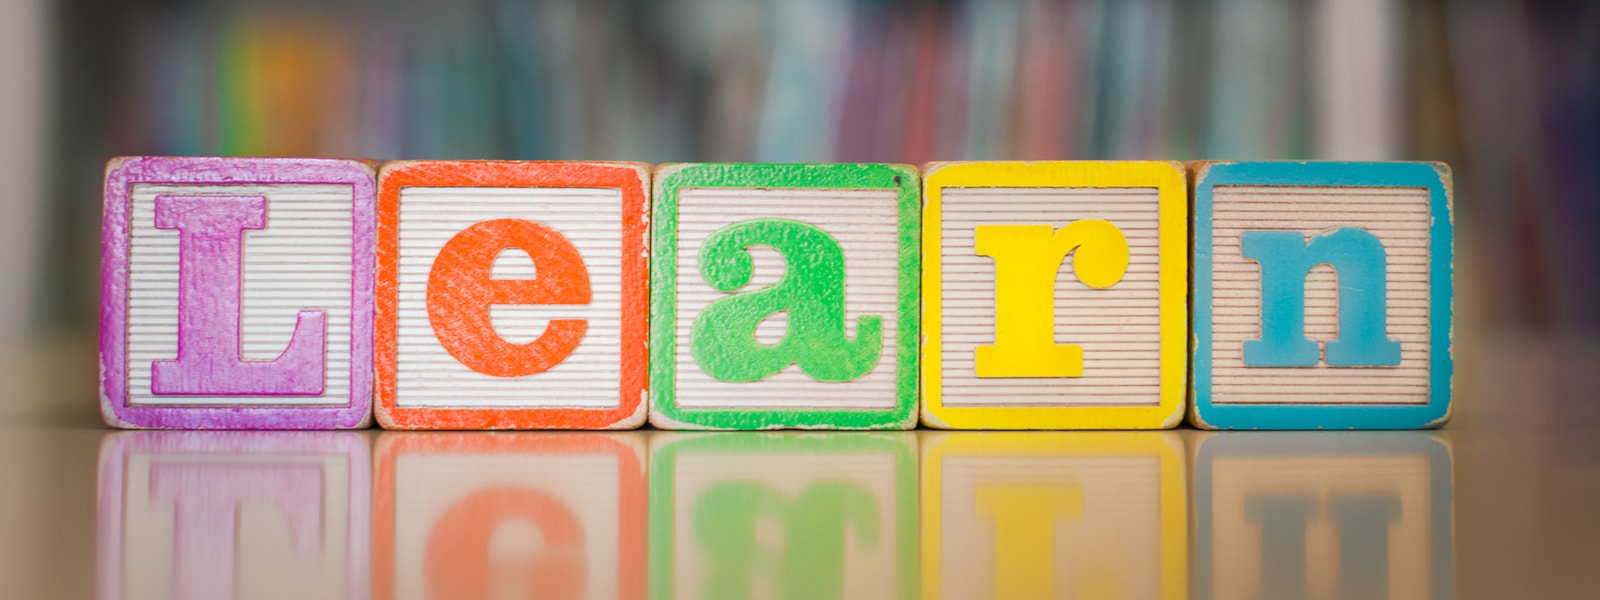 Letter blocks that spell out the word "Learn"